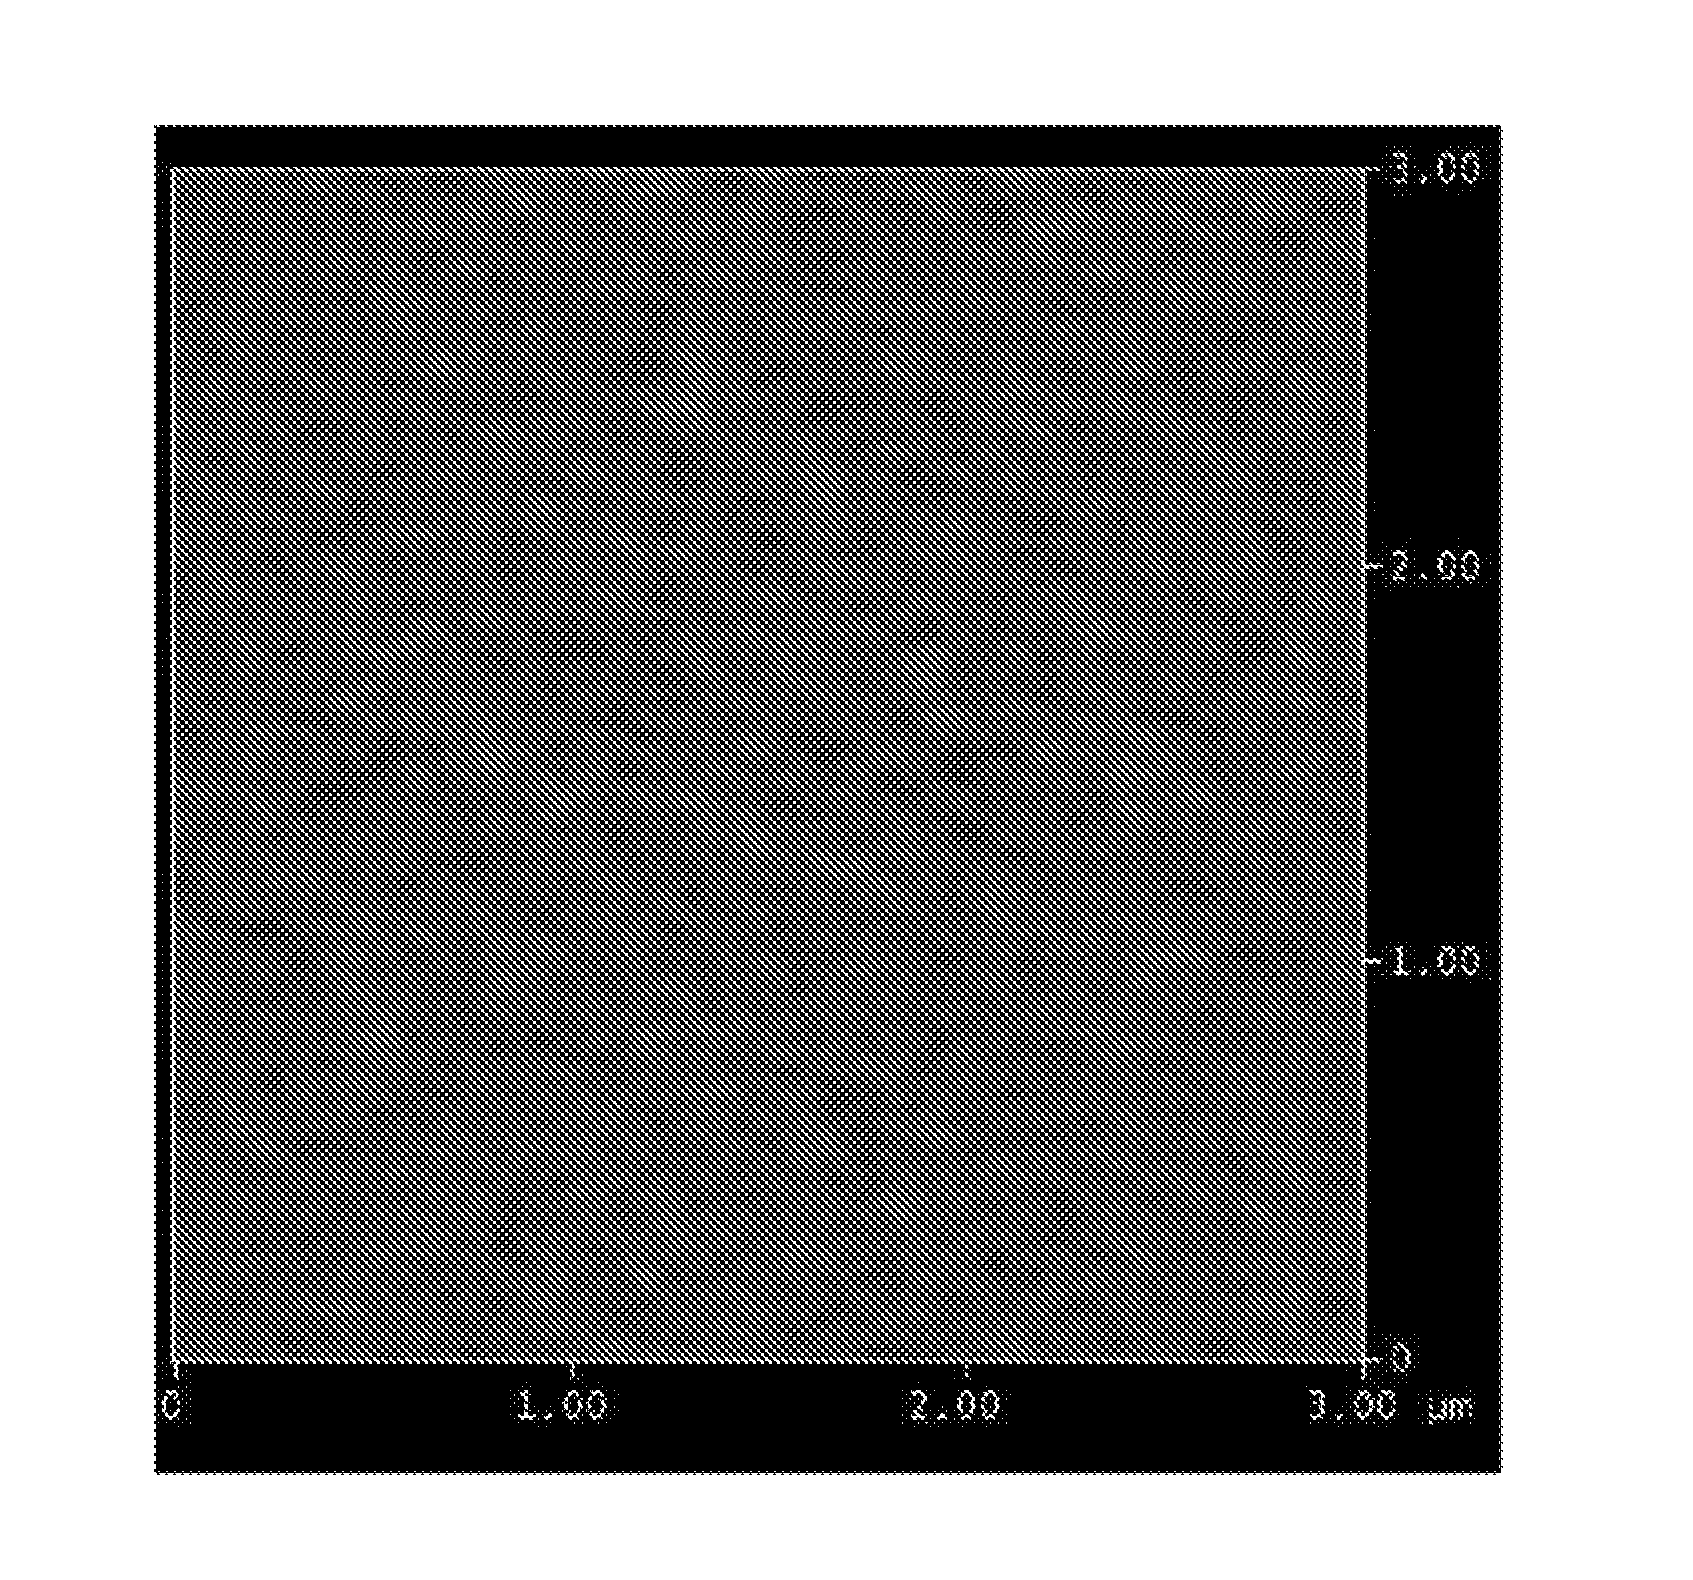 Glass substrate for information recording medium and method for producing the same